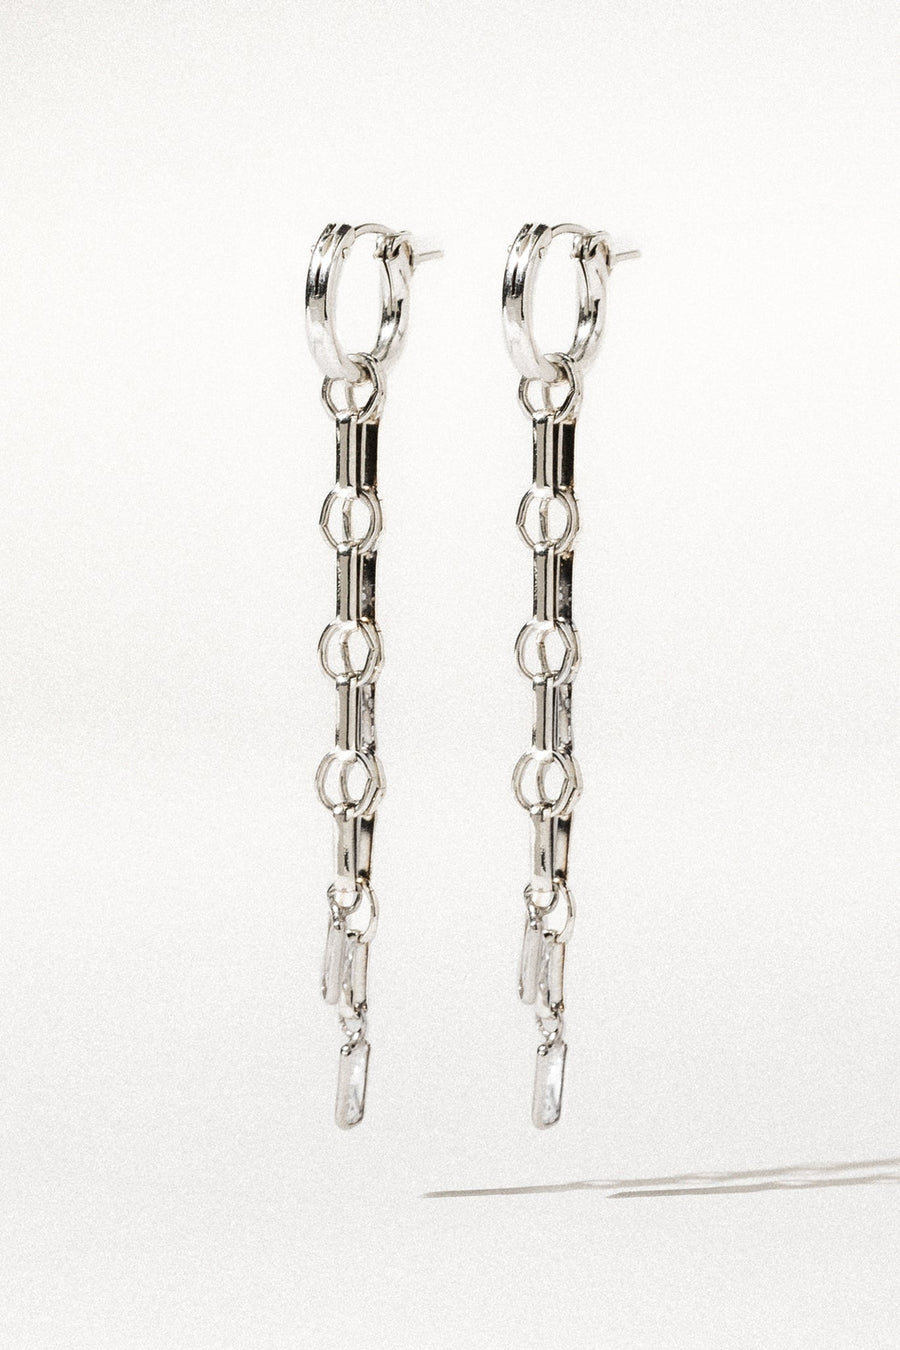 Goddess Jewelry Silver Copy of Delux Chain Earrings